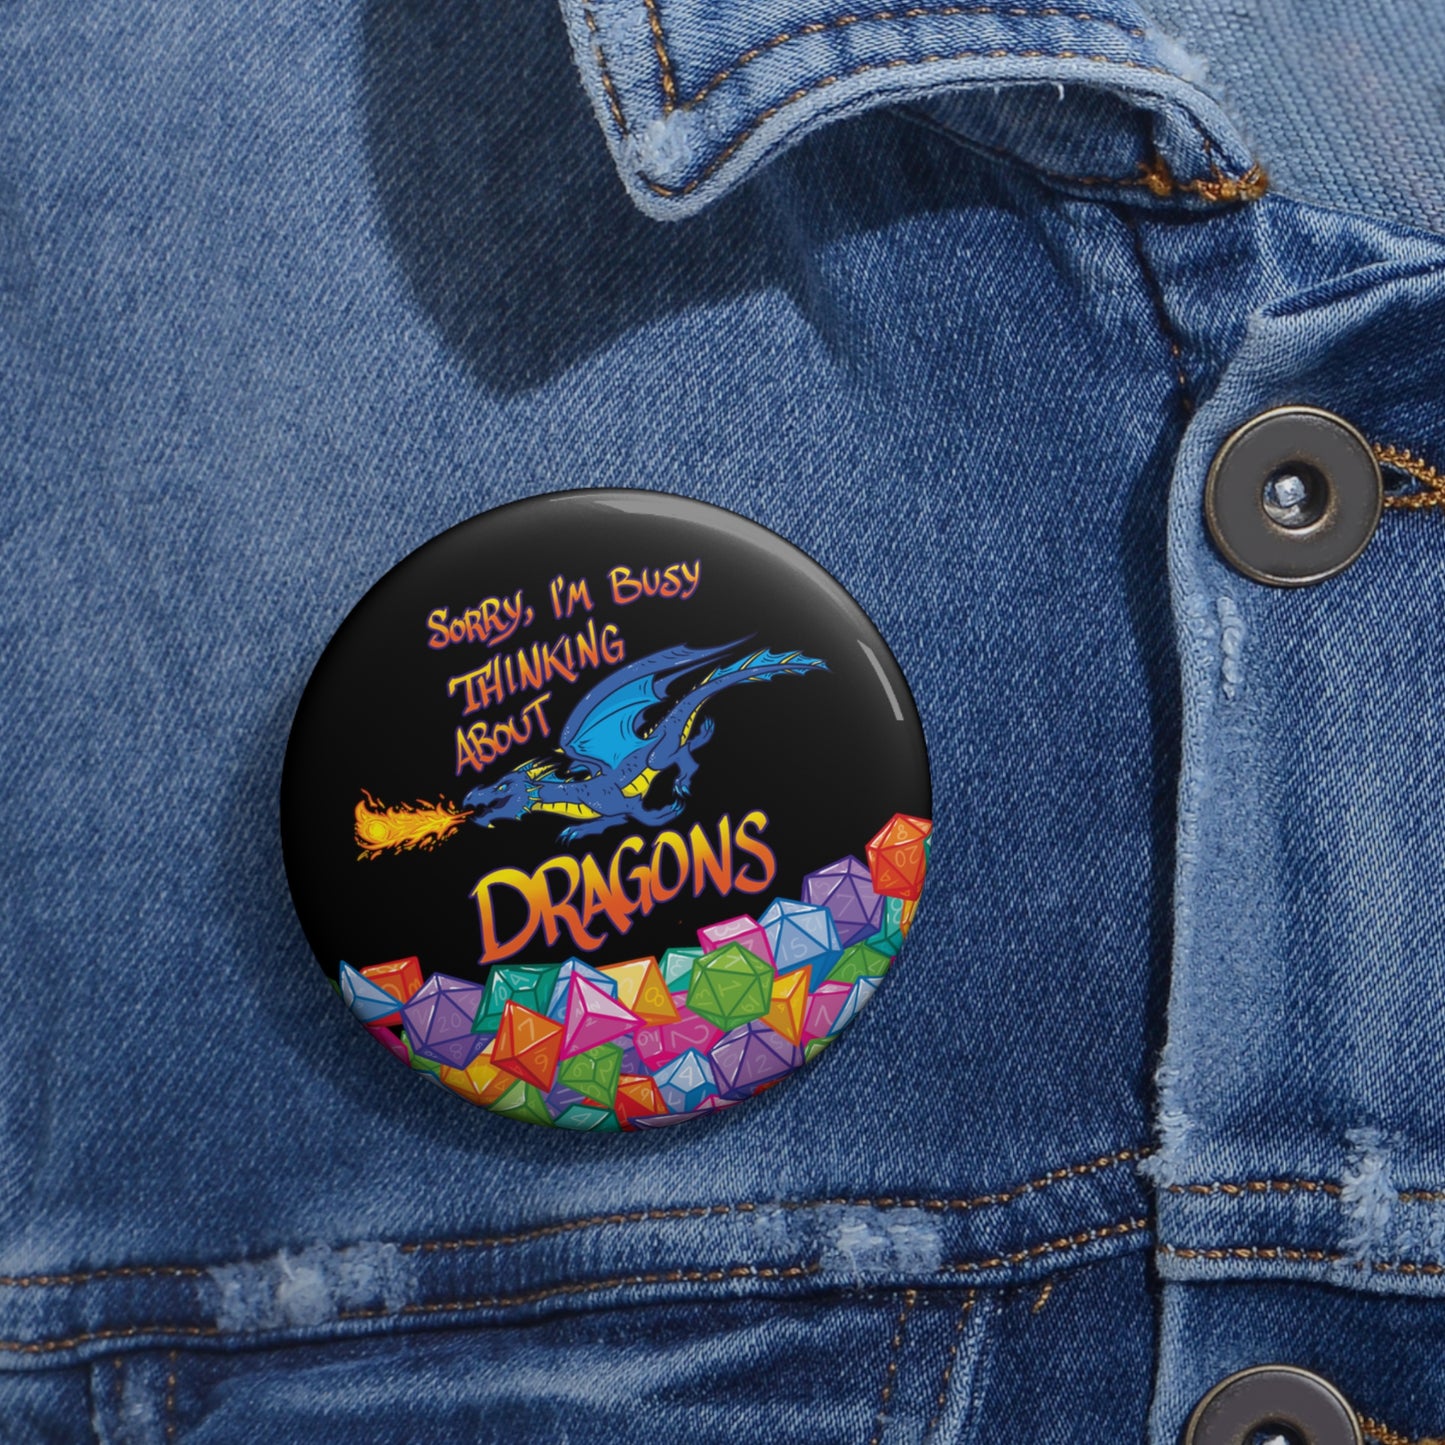 "Thinkin' About Dragons" Pin Buttons